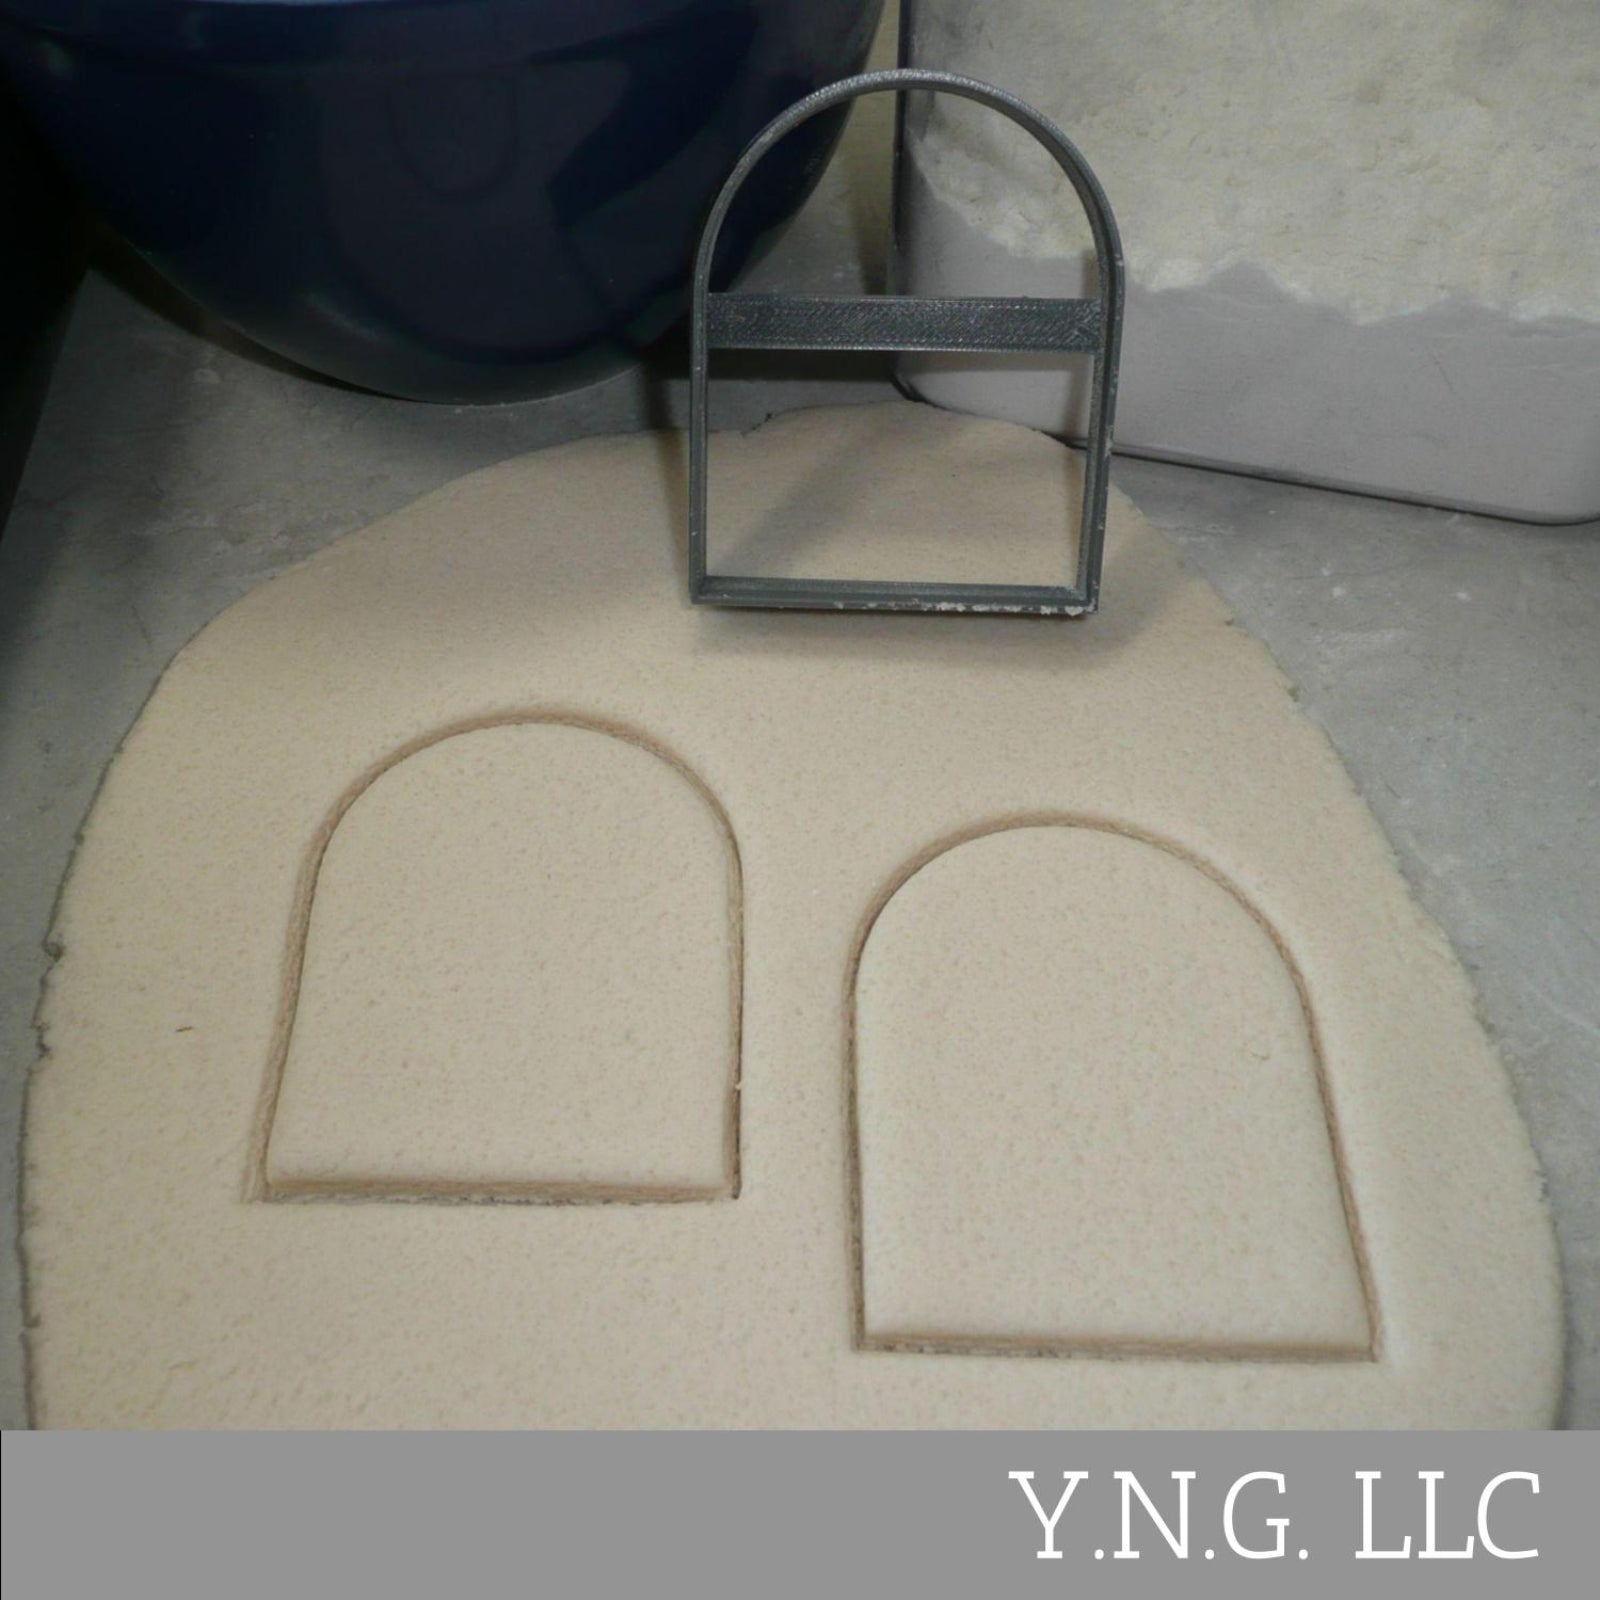 LV Louis Vuitton Iconic Luxury High End Fashion Cookie Cutter PR3021